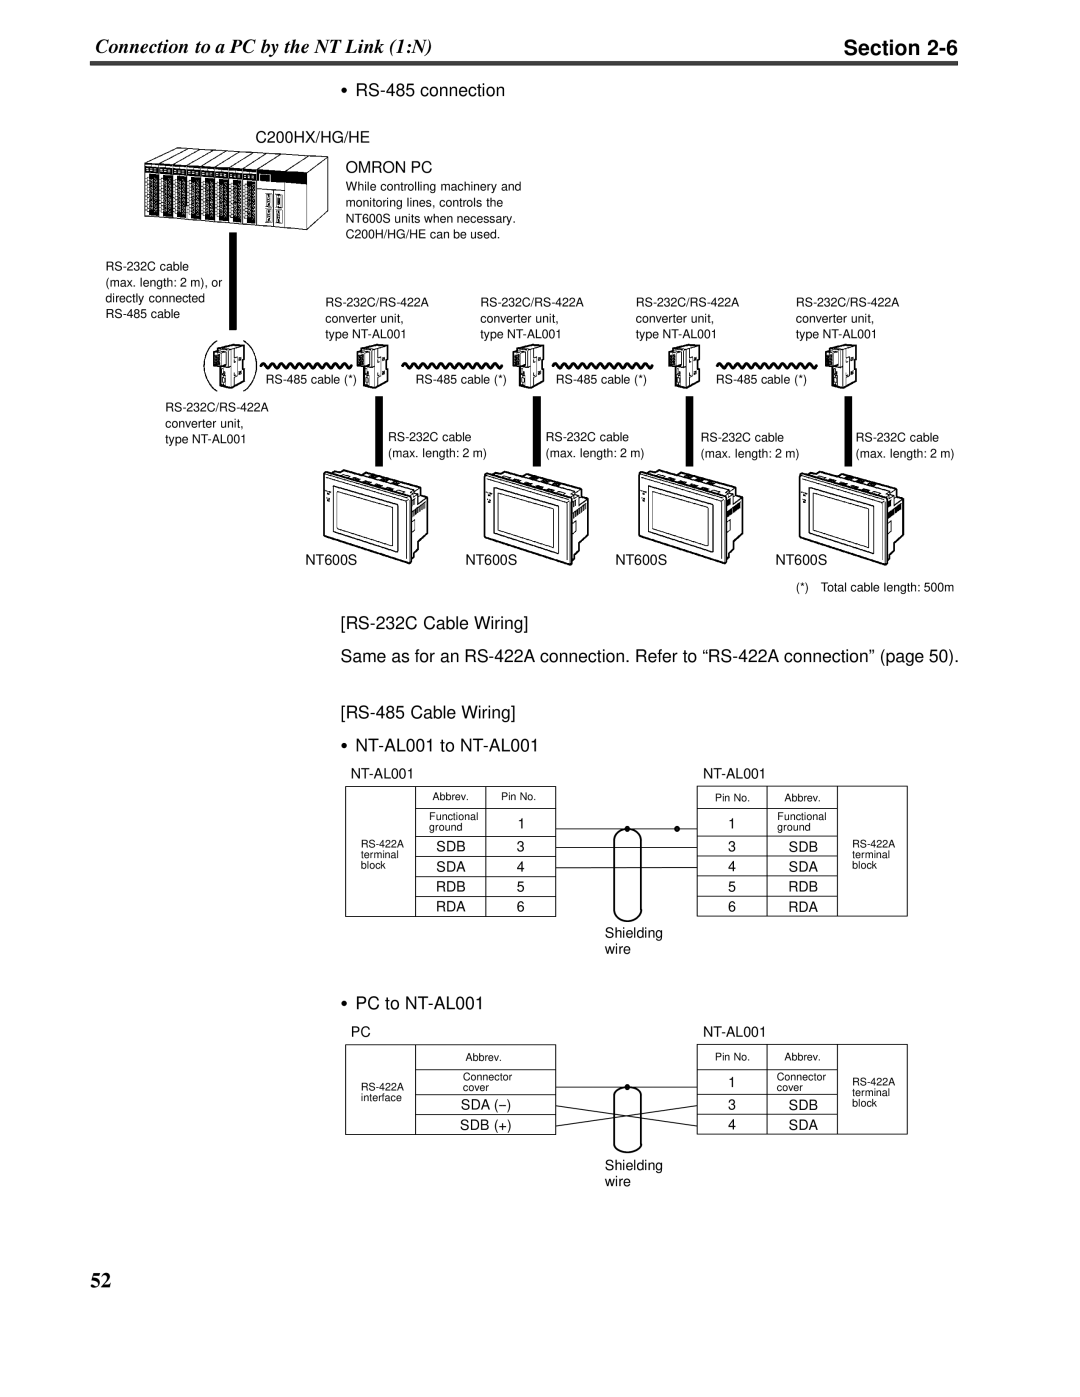 Omron V022-E3-1 operation manual Section, RS-485connection, RS-232CCable Wiring, NT-AL001to NT-AL001, PC to NT-AL001 